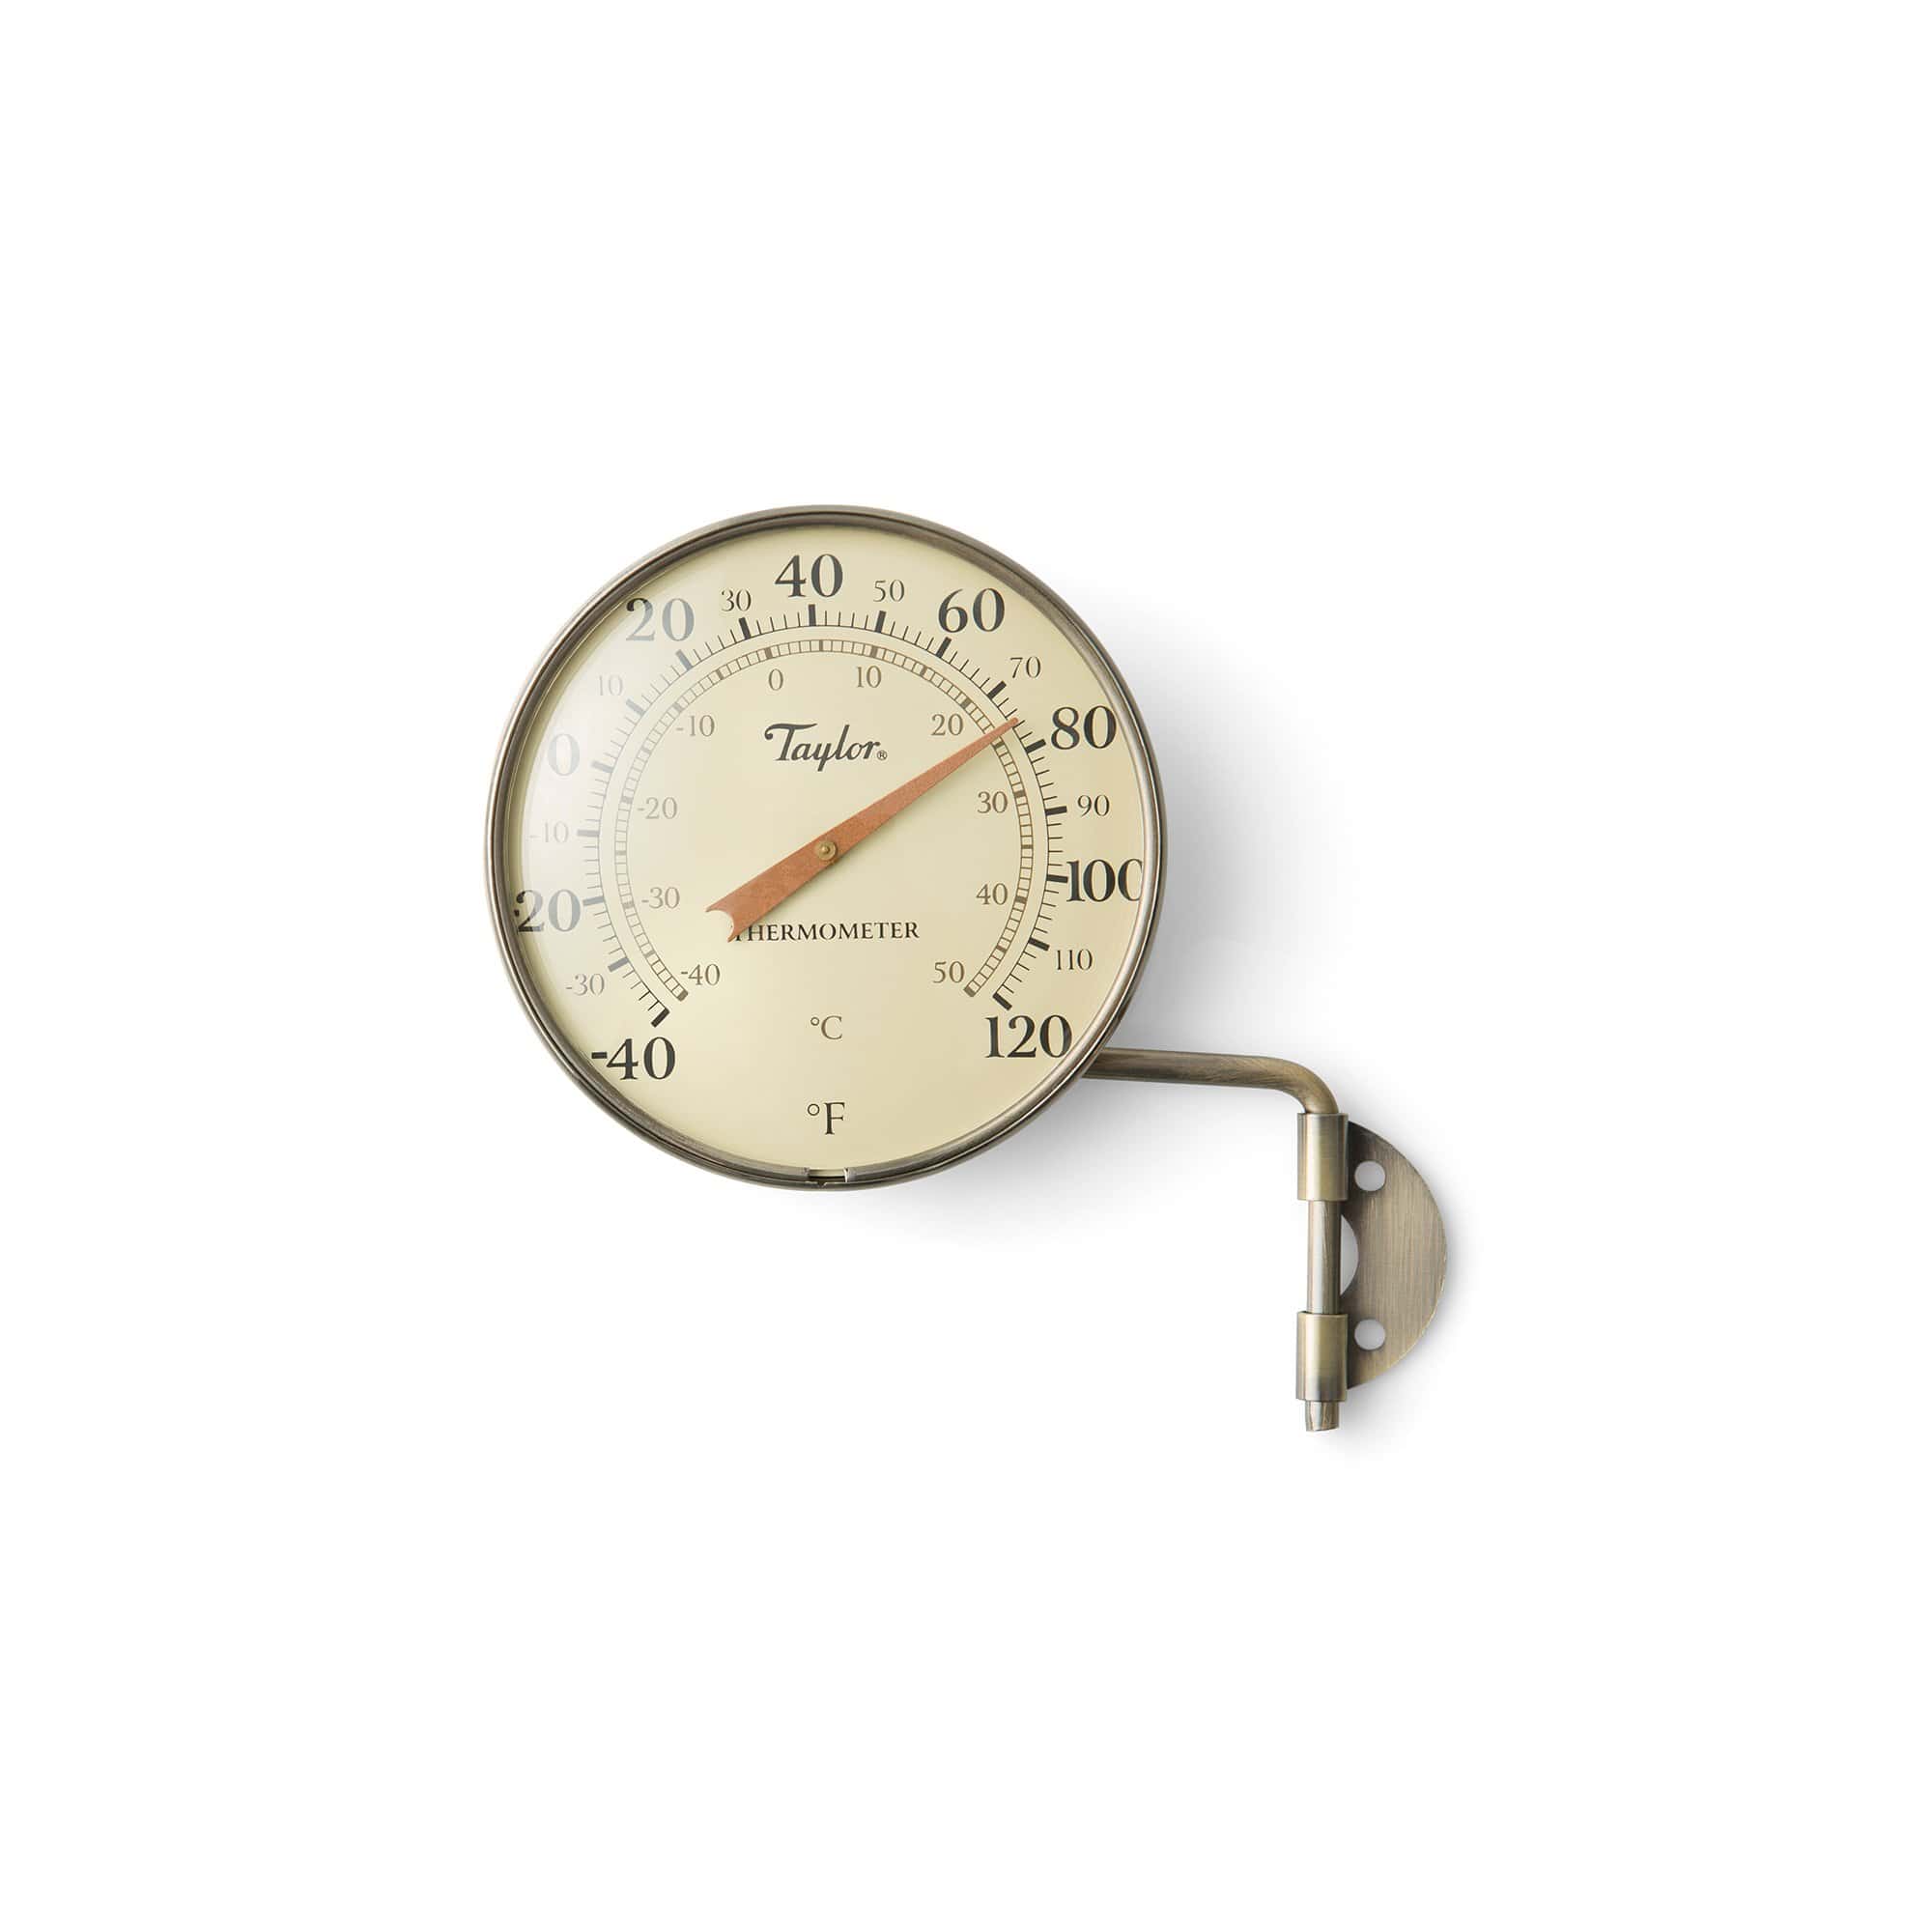 8.5 Dial Thermometer, 480BZN